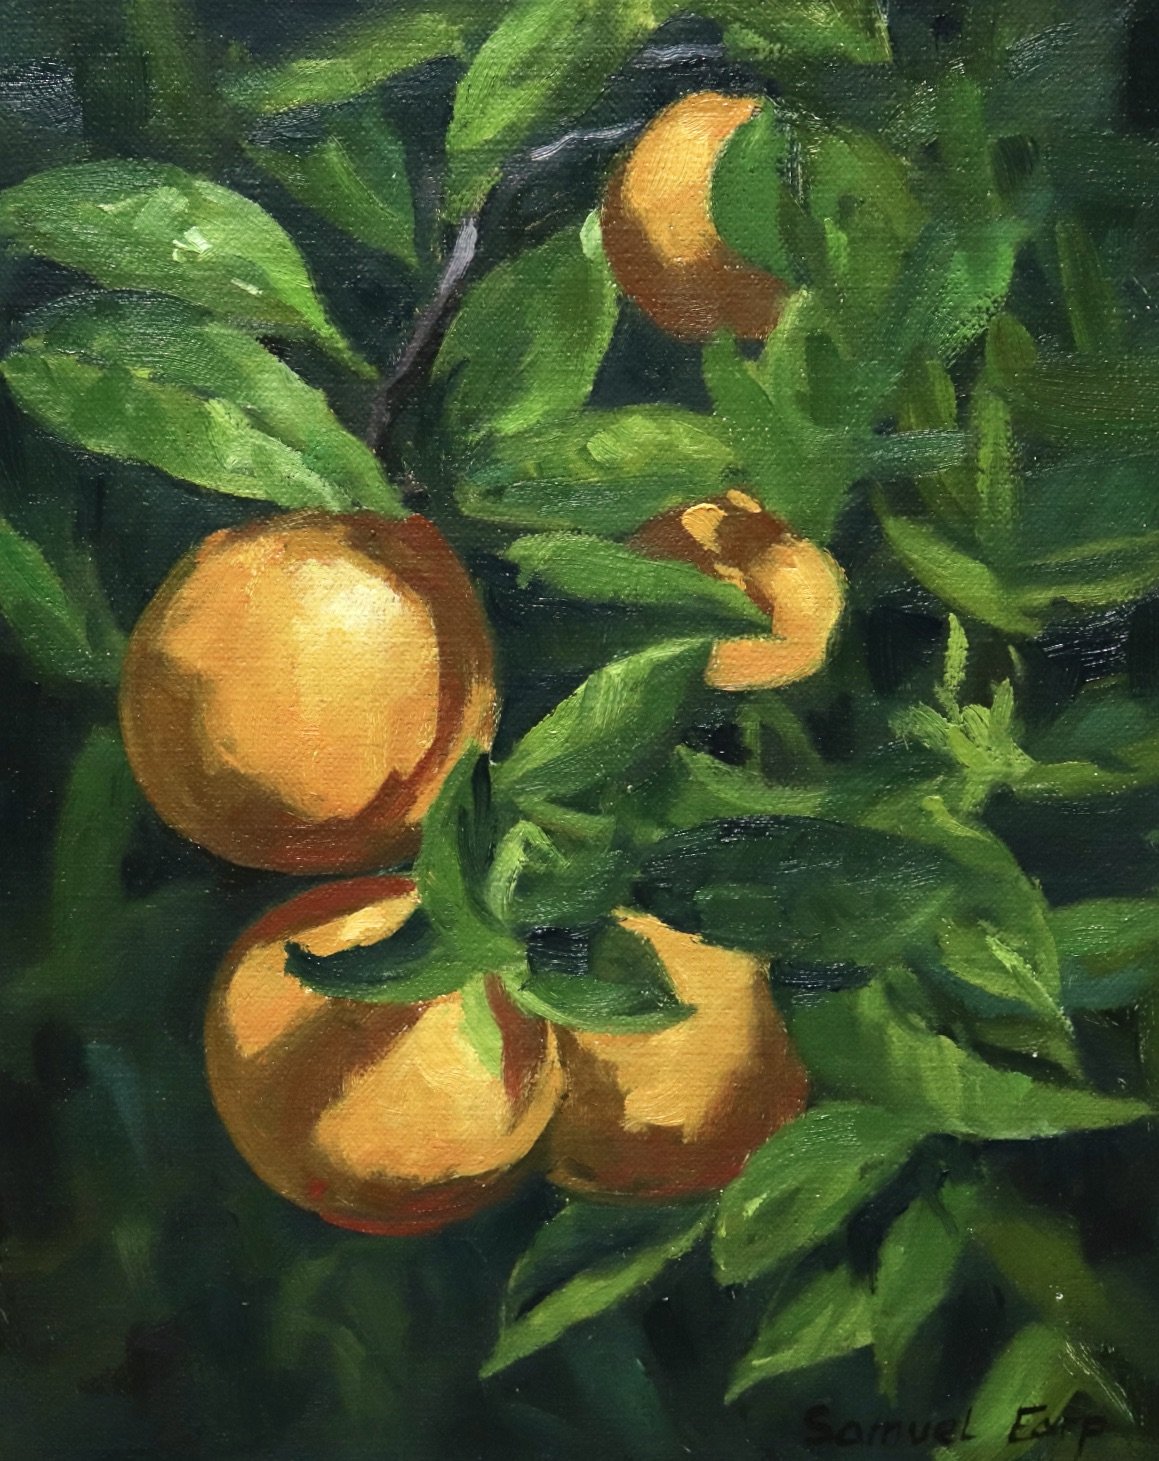 How to Paint Oranges